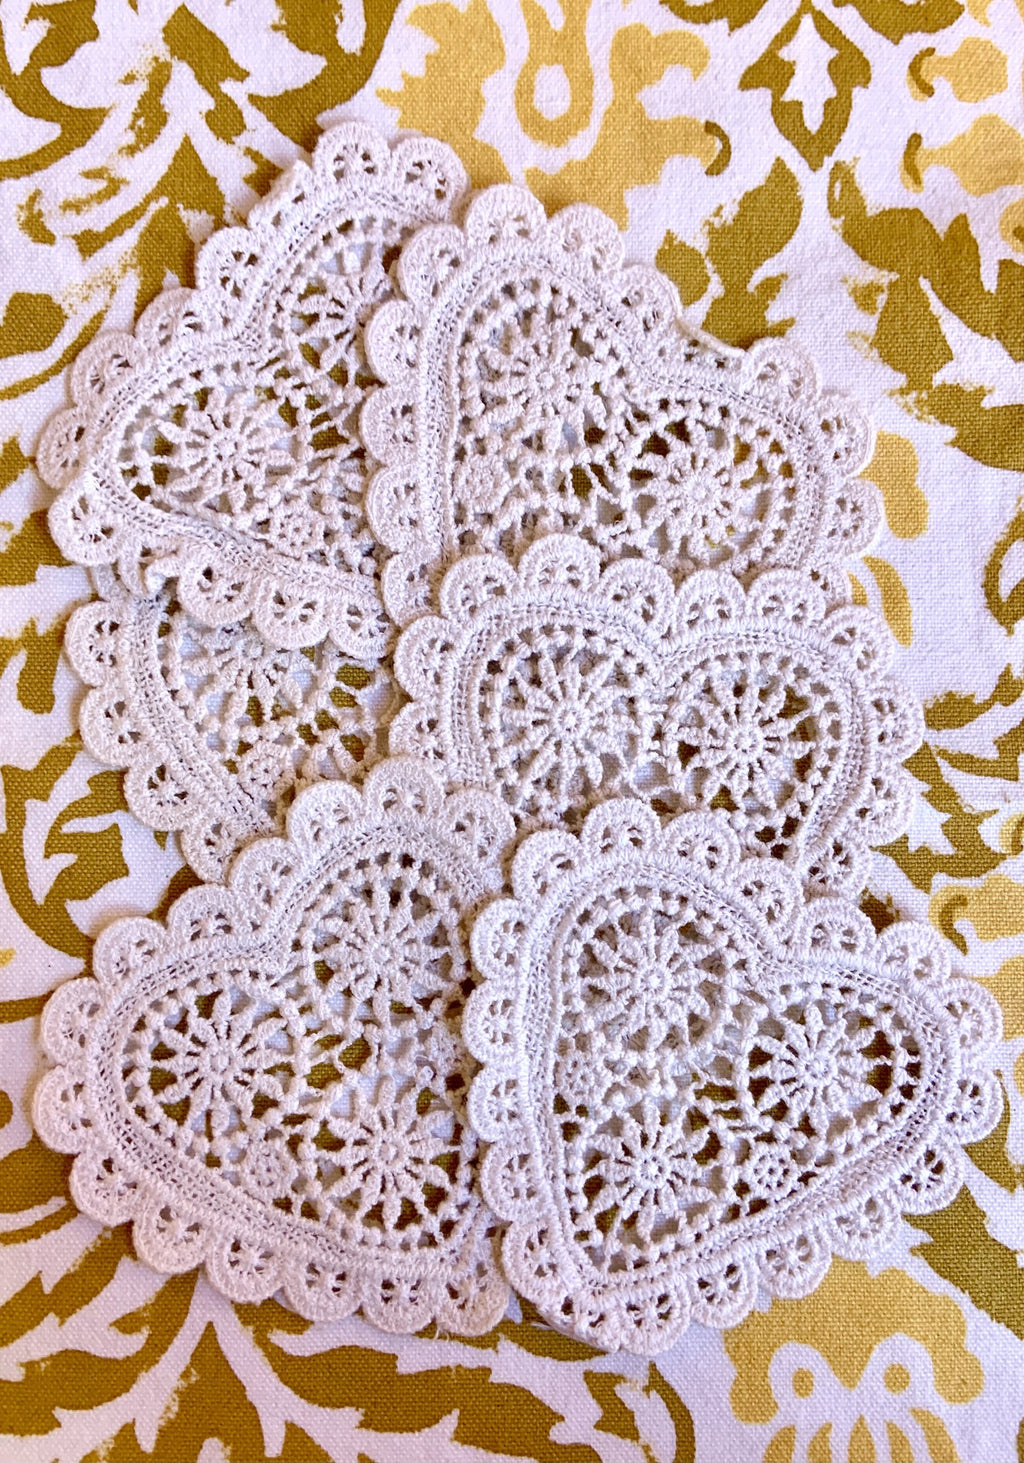 Set of Lace Hearts